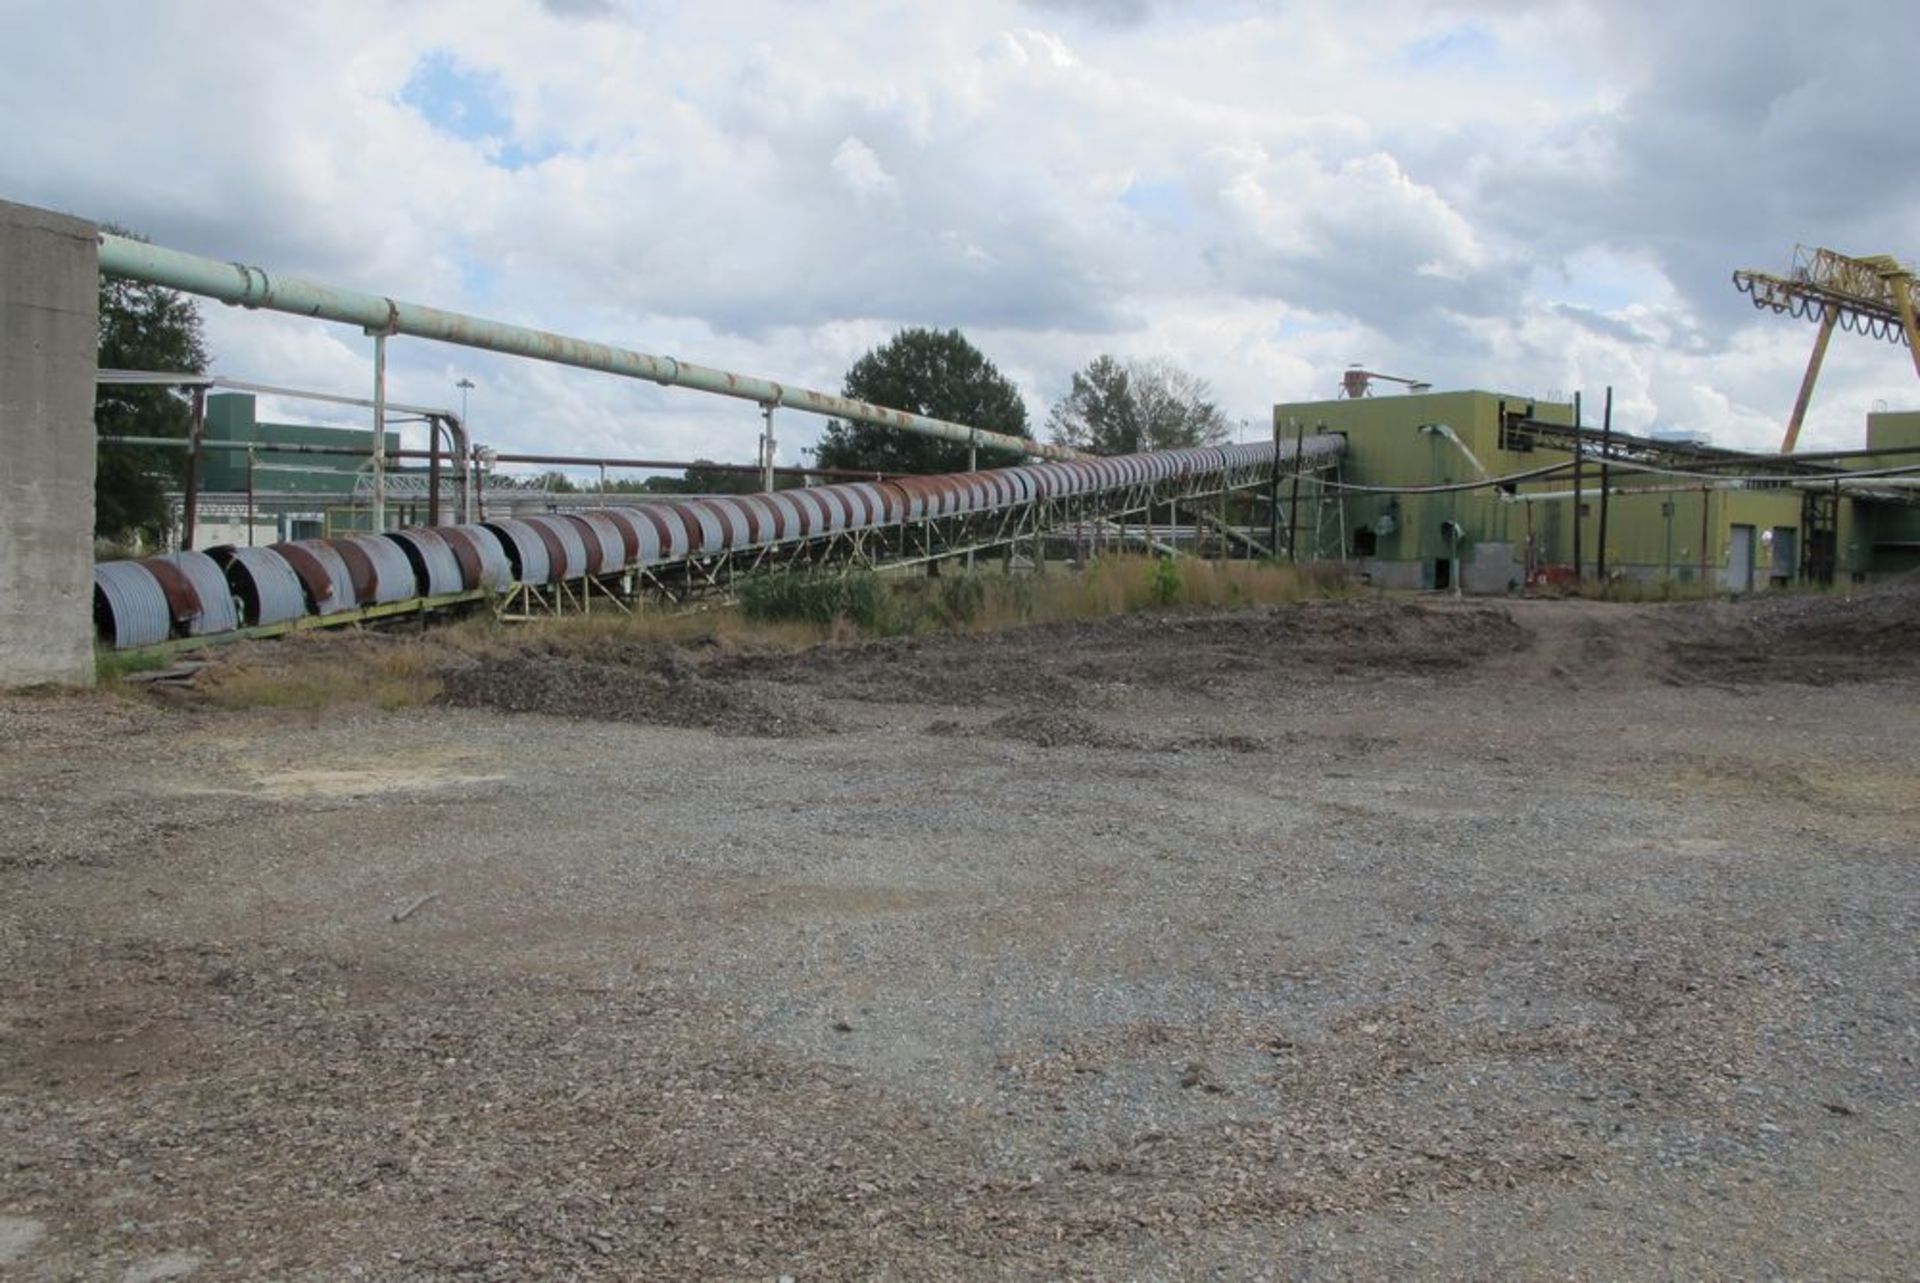 280'L RUBBER BELT INCLINE CONVEYOR (COBRA TOWER TO WOOD BUILDING, 3RD LEVEL) INCL 7 SUPPORT